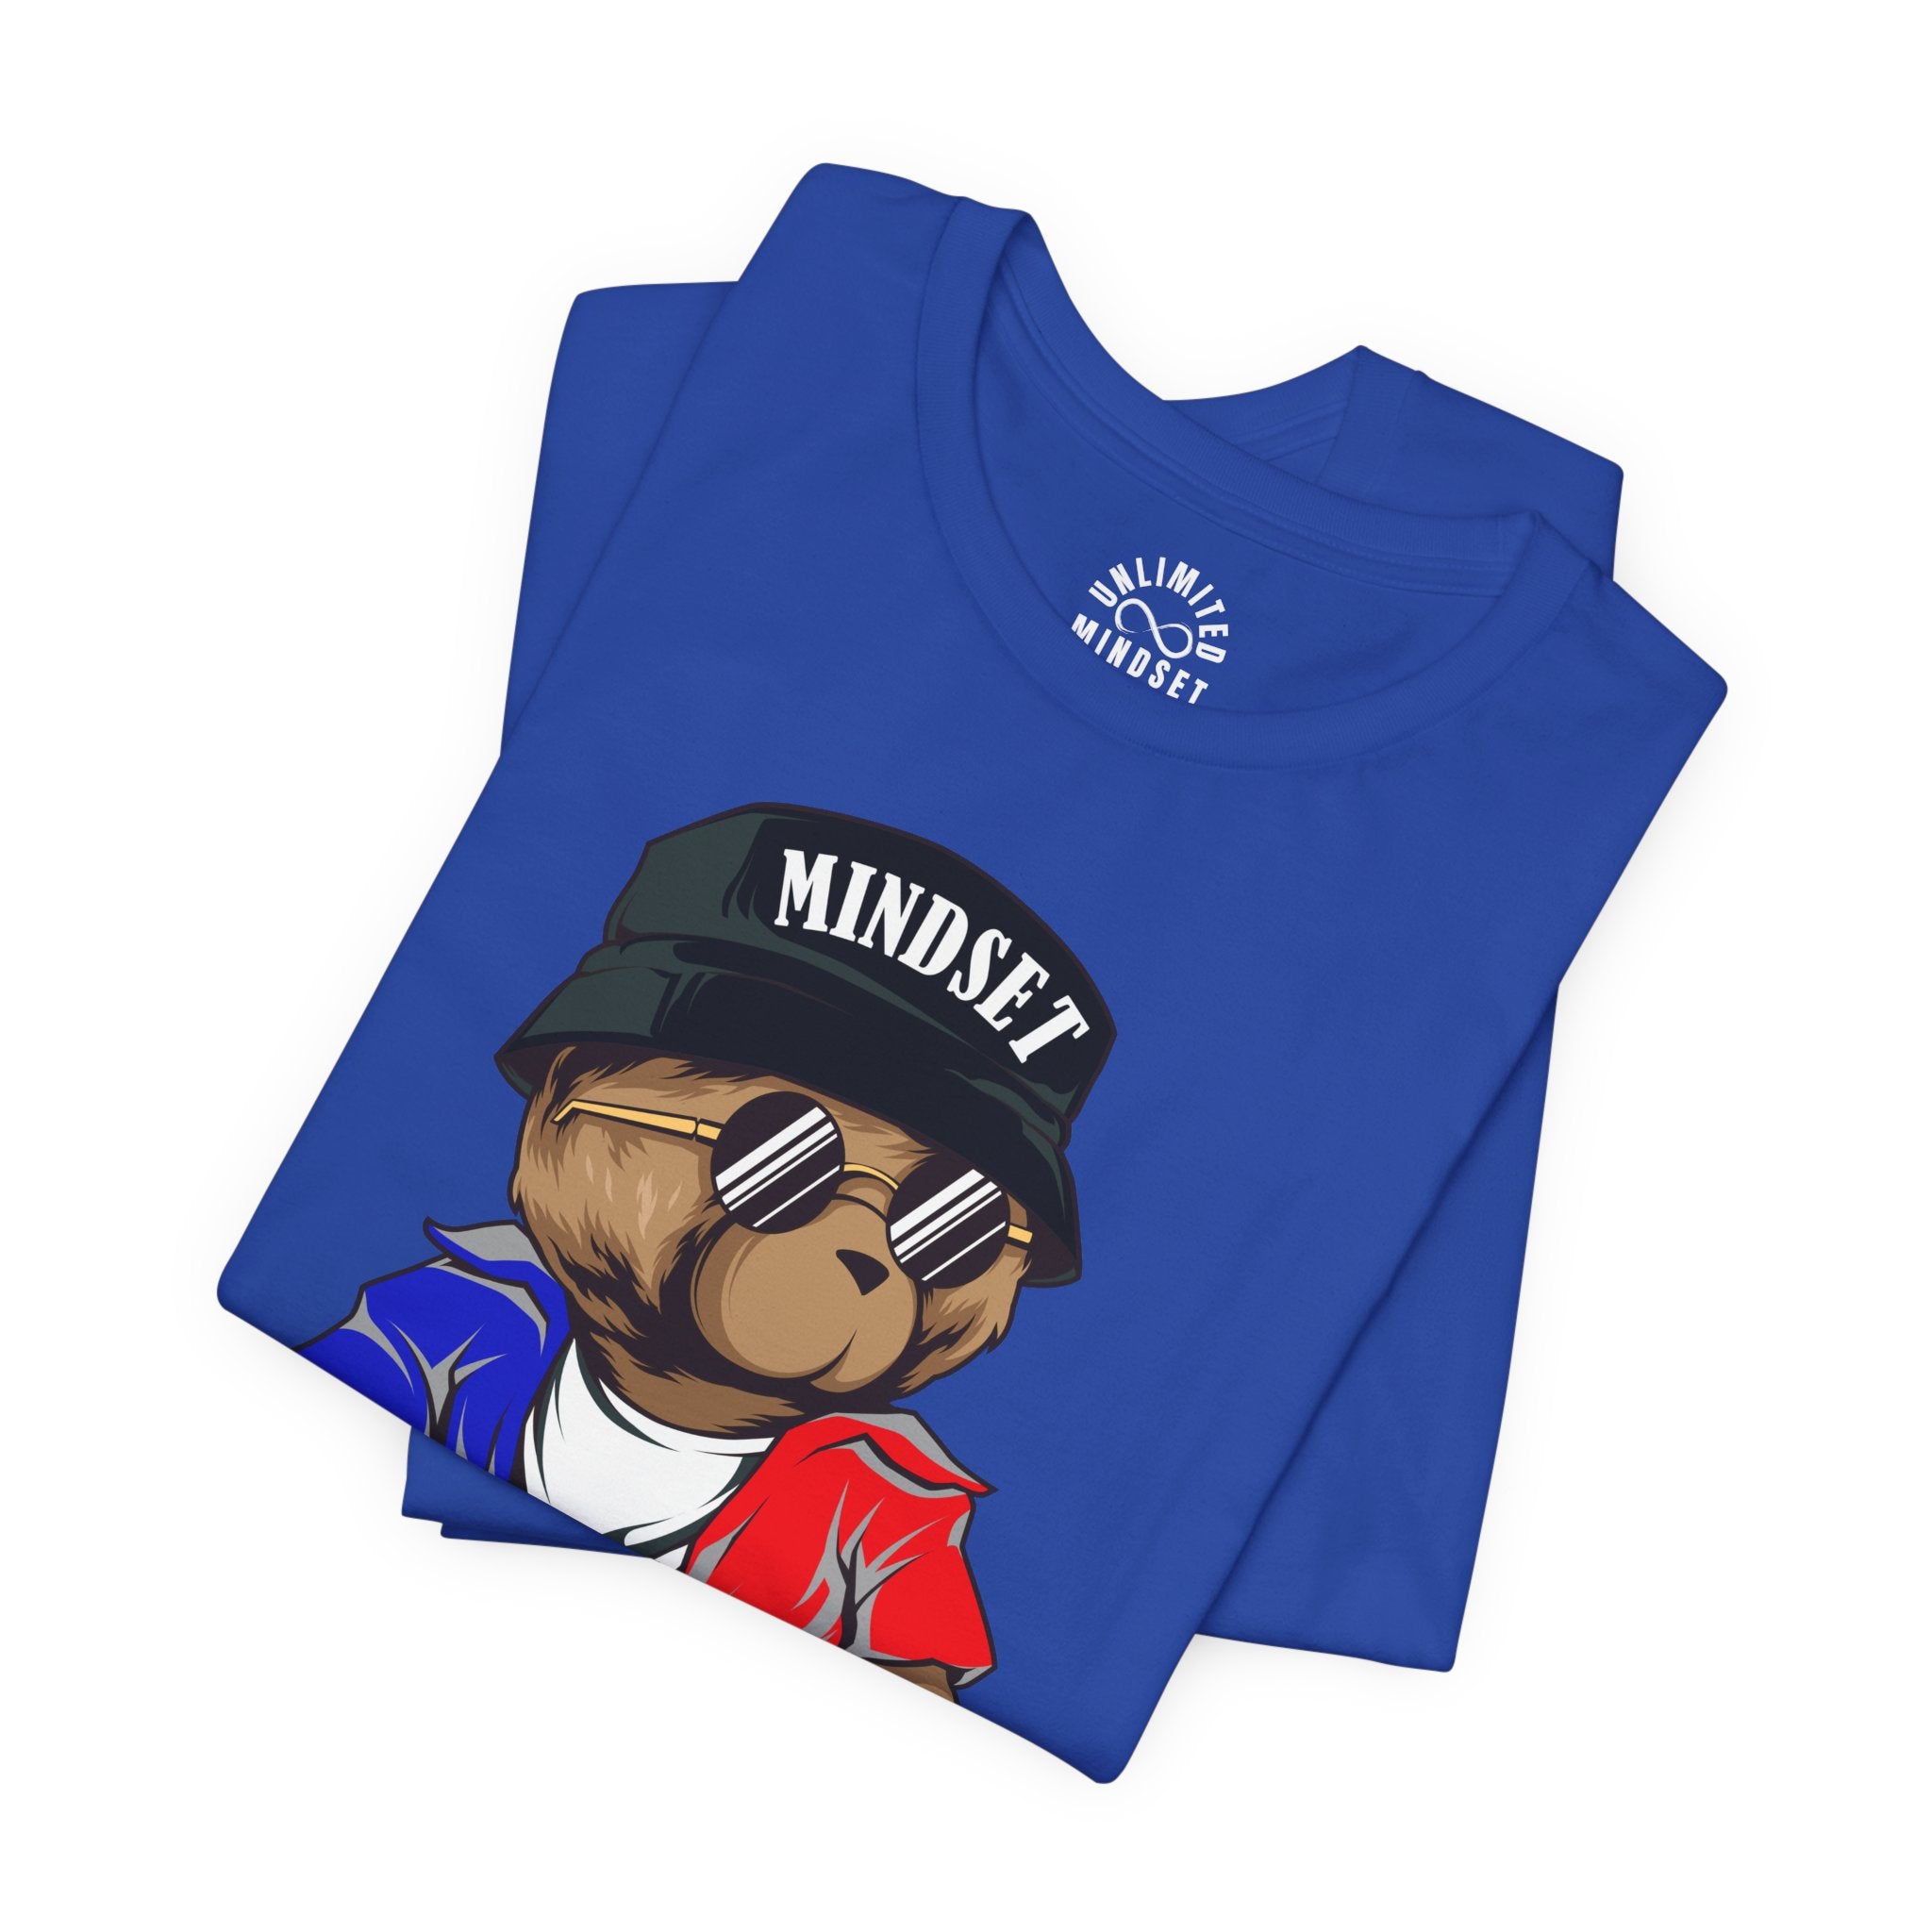 Mindset Bear With The Hat T-shirt